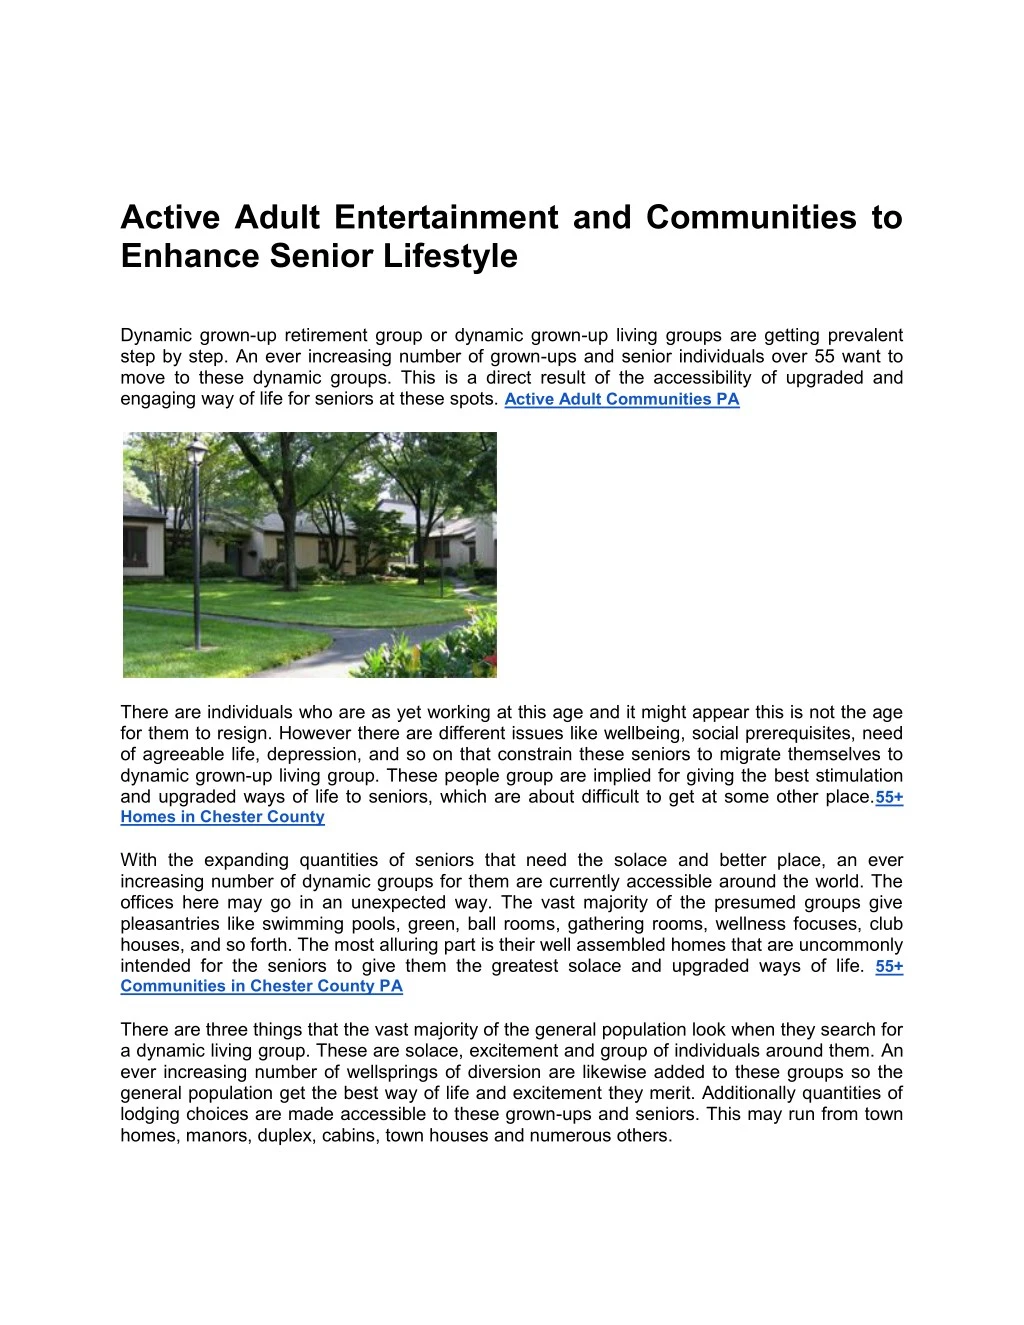 active adult entertainment and communities